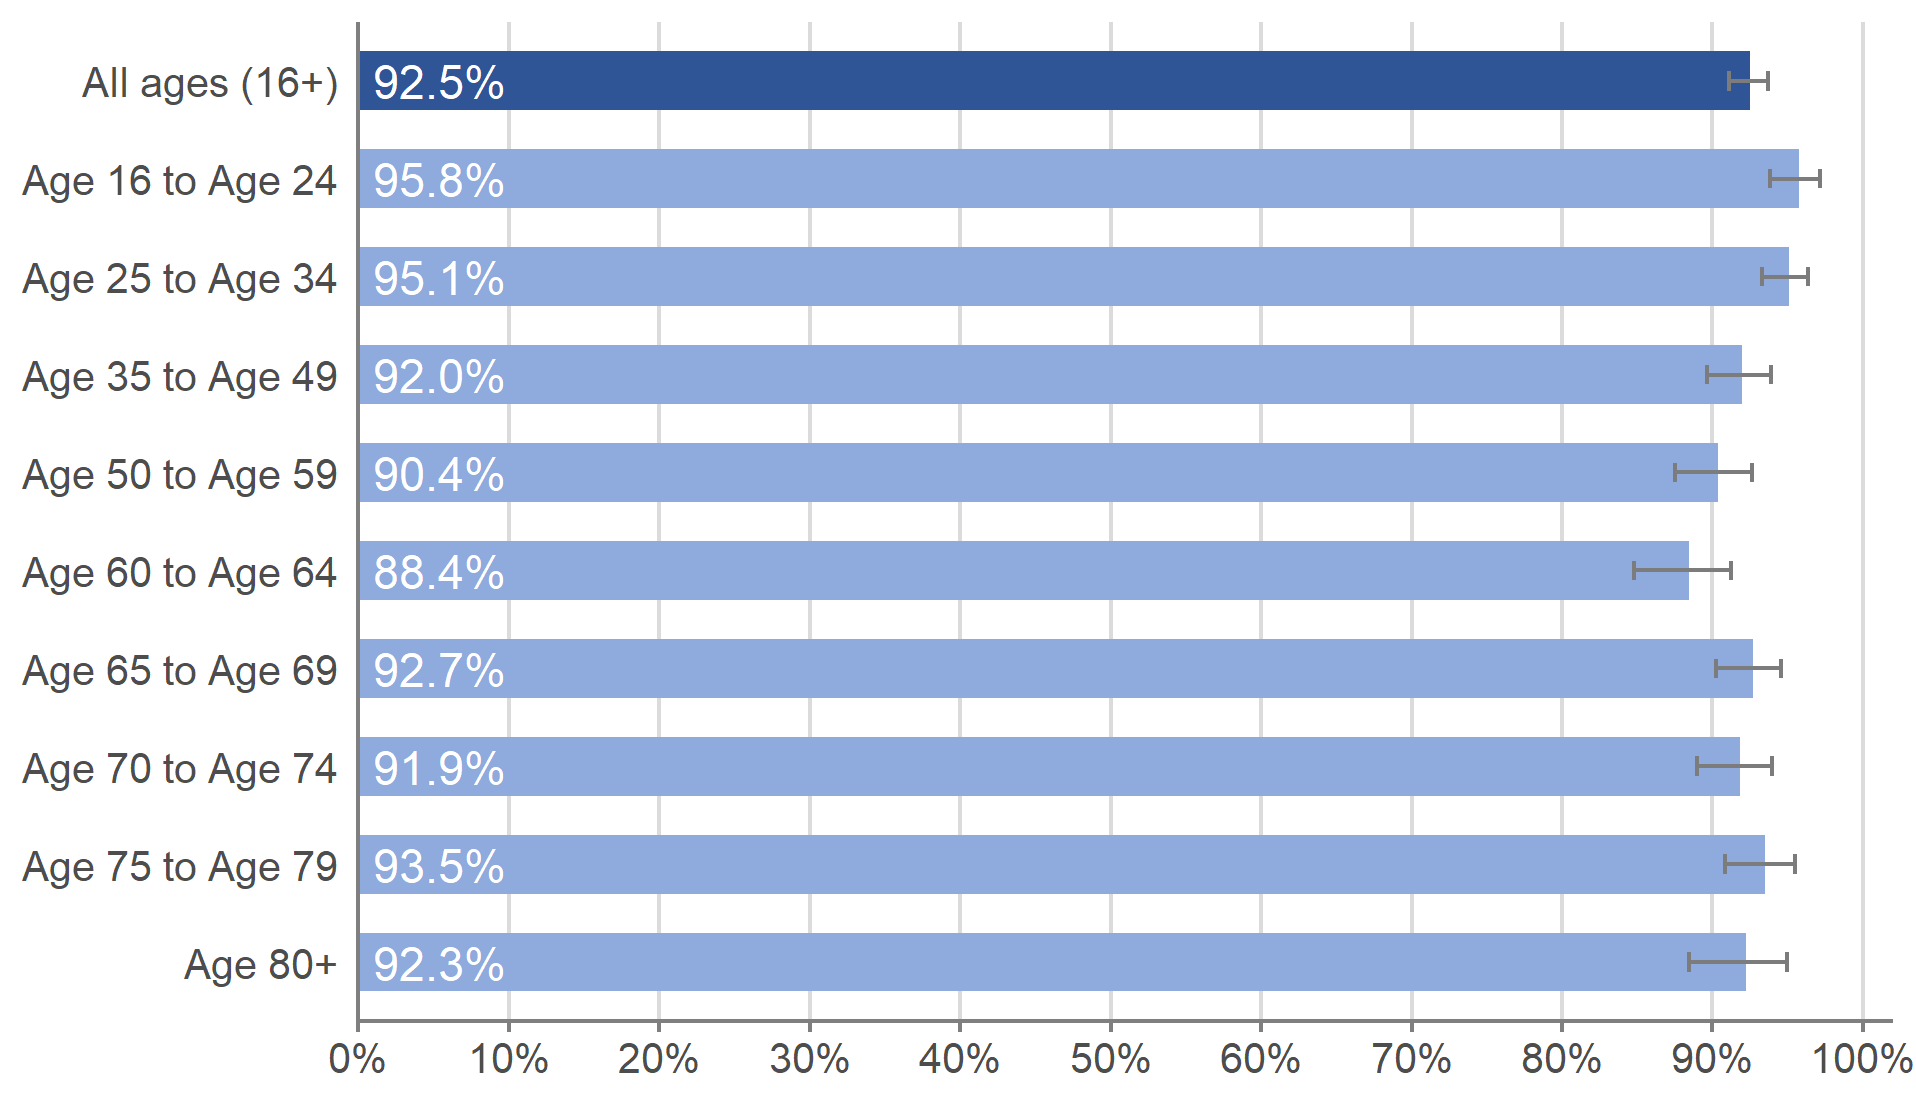 This chart shows the modelled weekly estimate of the percentage of people in the community population testing positive for antibodies to SARS-CoV-2 in the week beginning 1 November 2021 by age group including credible intervals.   The percentage of adults in the community population testing positive for antibodies aged 16 to 24 years was 95.8% (95% credible interval: 93.8% to 97.1%). The percentage testing positive for antibodies in those aged 25 and over ranged from 88.4% to 95.1%; the highest percentage of people testing positive for antibodies was in those aged 16 to 24, followed by those aged 25 to 34 at 95.8% (95% credible interval: 93.8% to 97.1%).